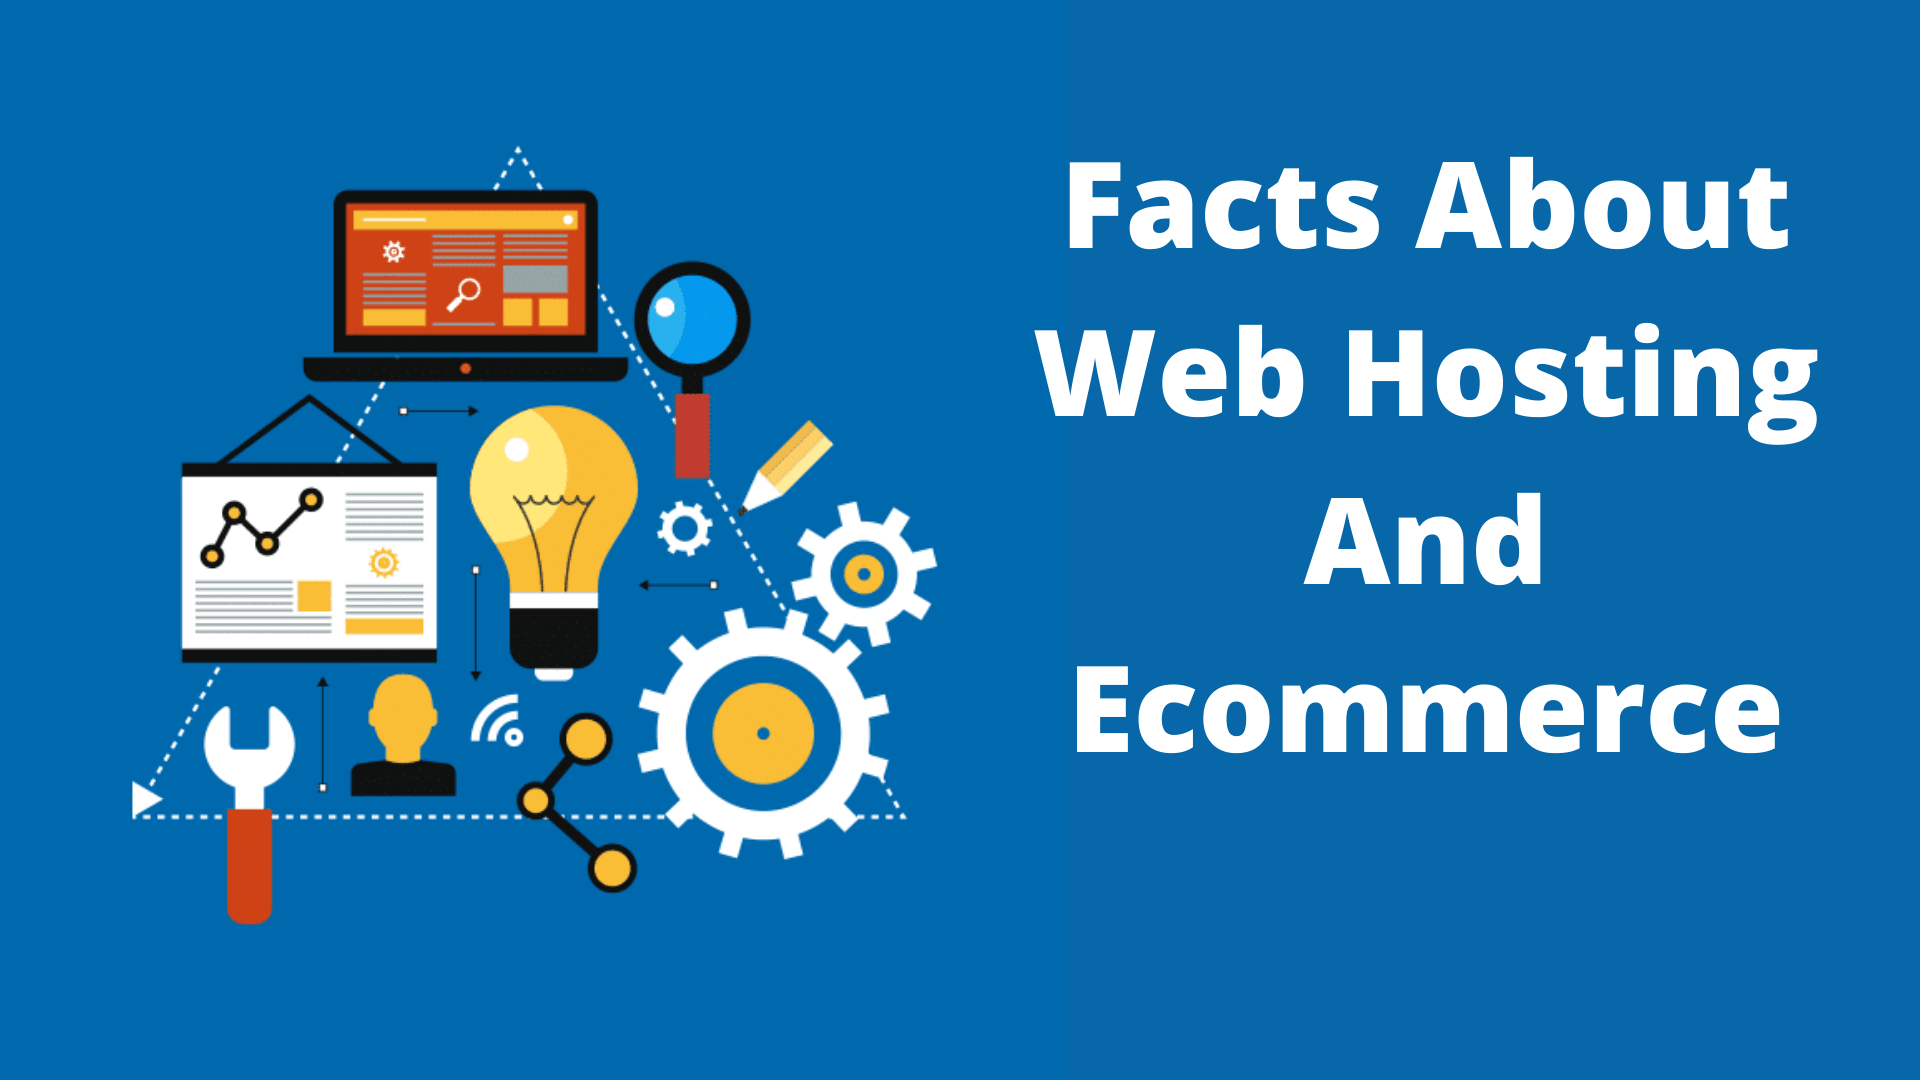 Facts About Web Hosting And Ecommerce (1)